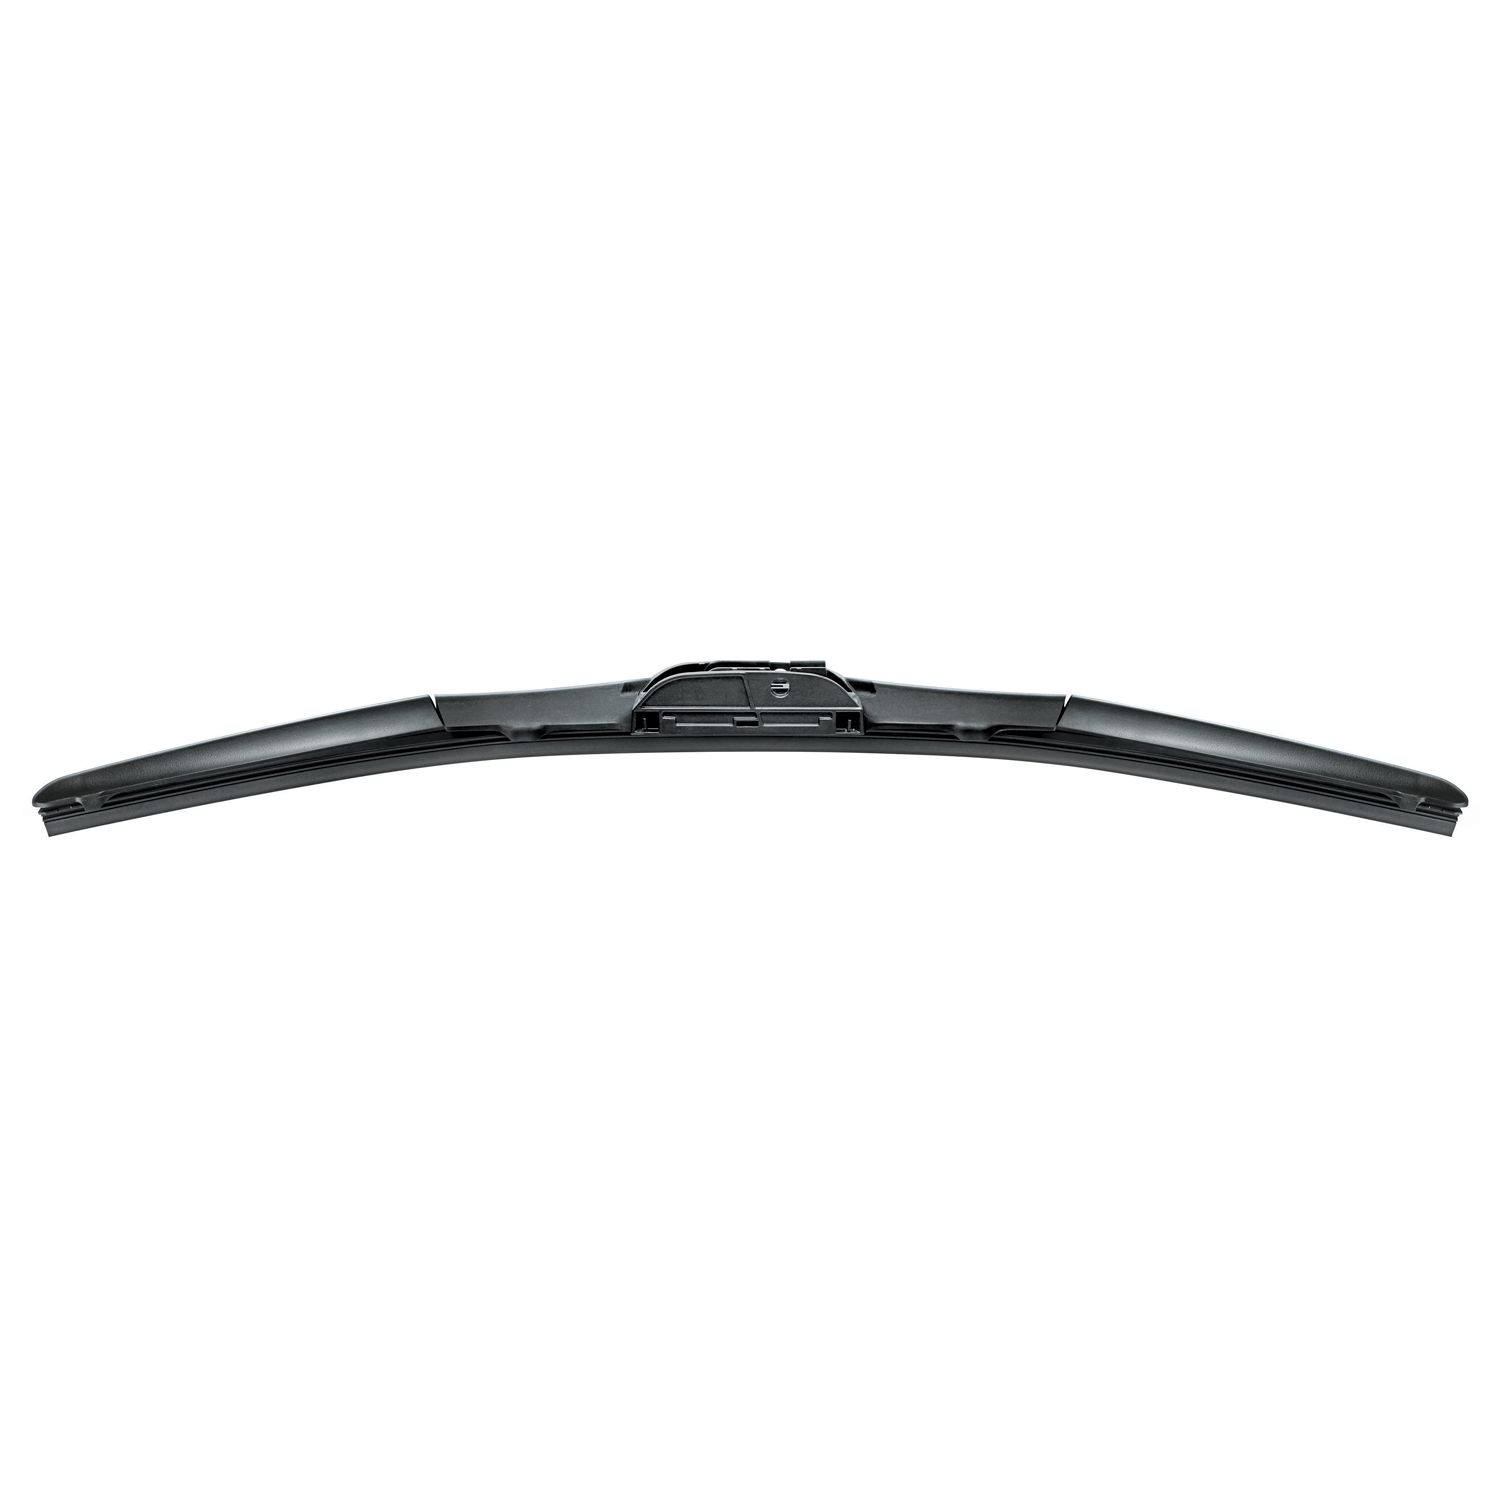 TRICO Sentry 32-260 Hybrid Wiper Blade with Dual-Shield Technology - 26"